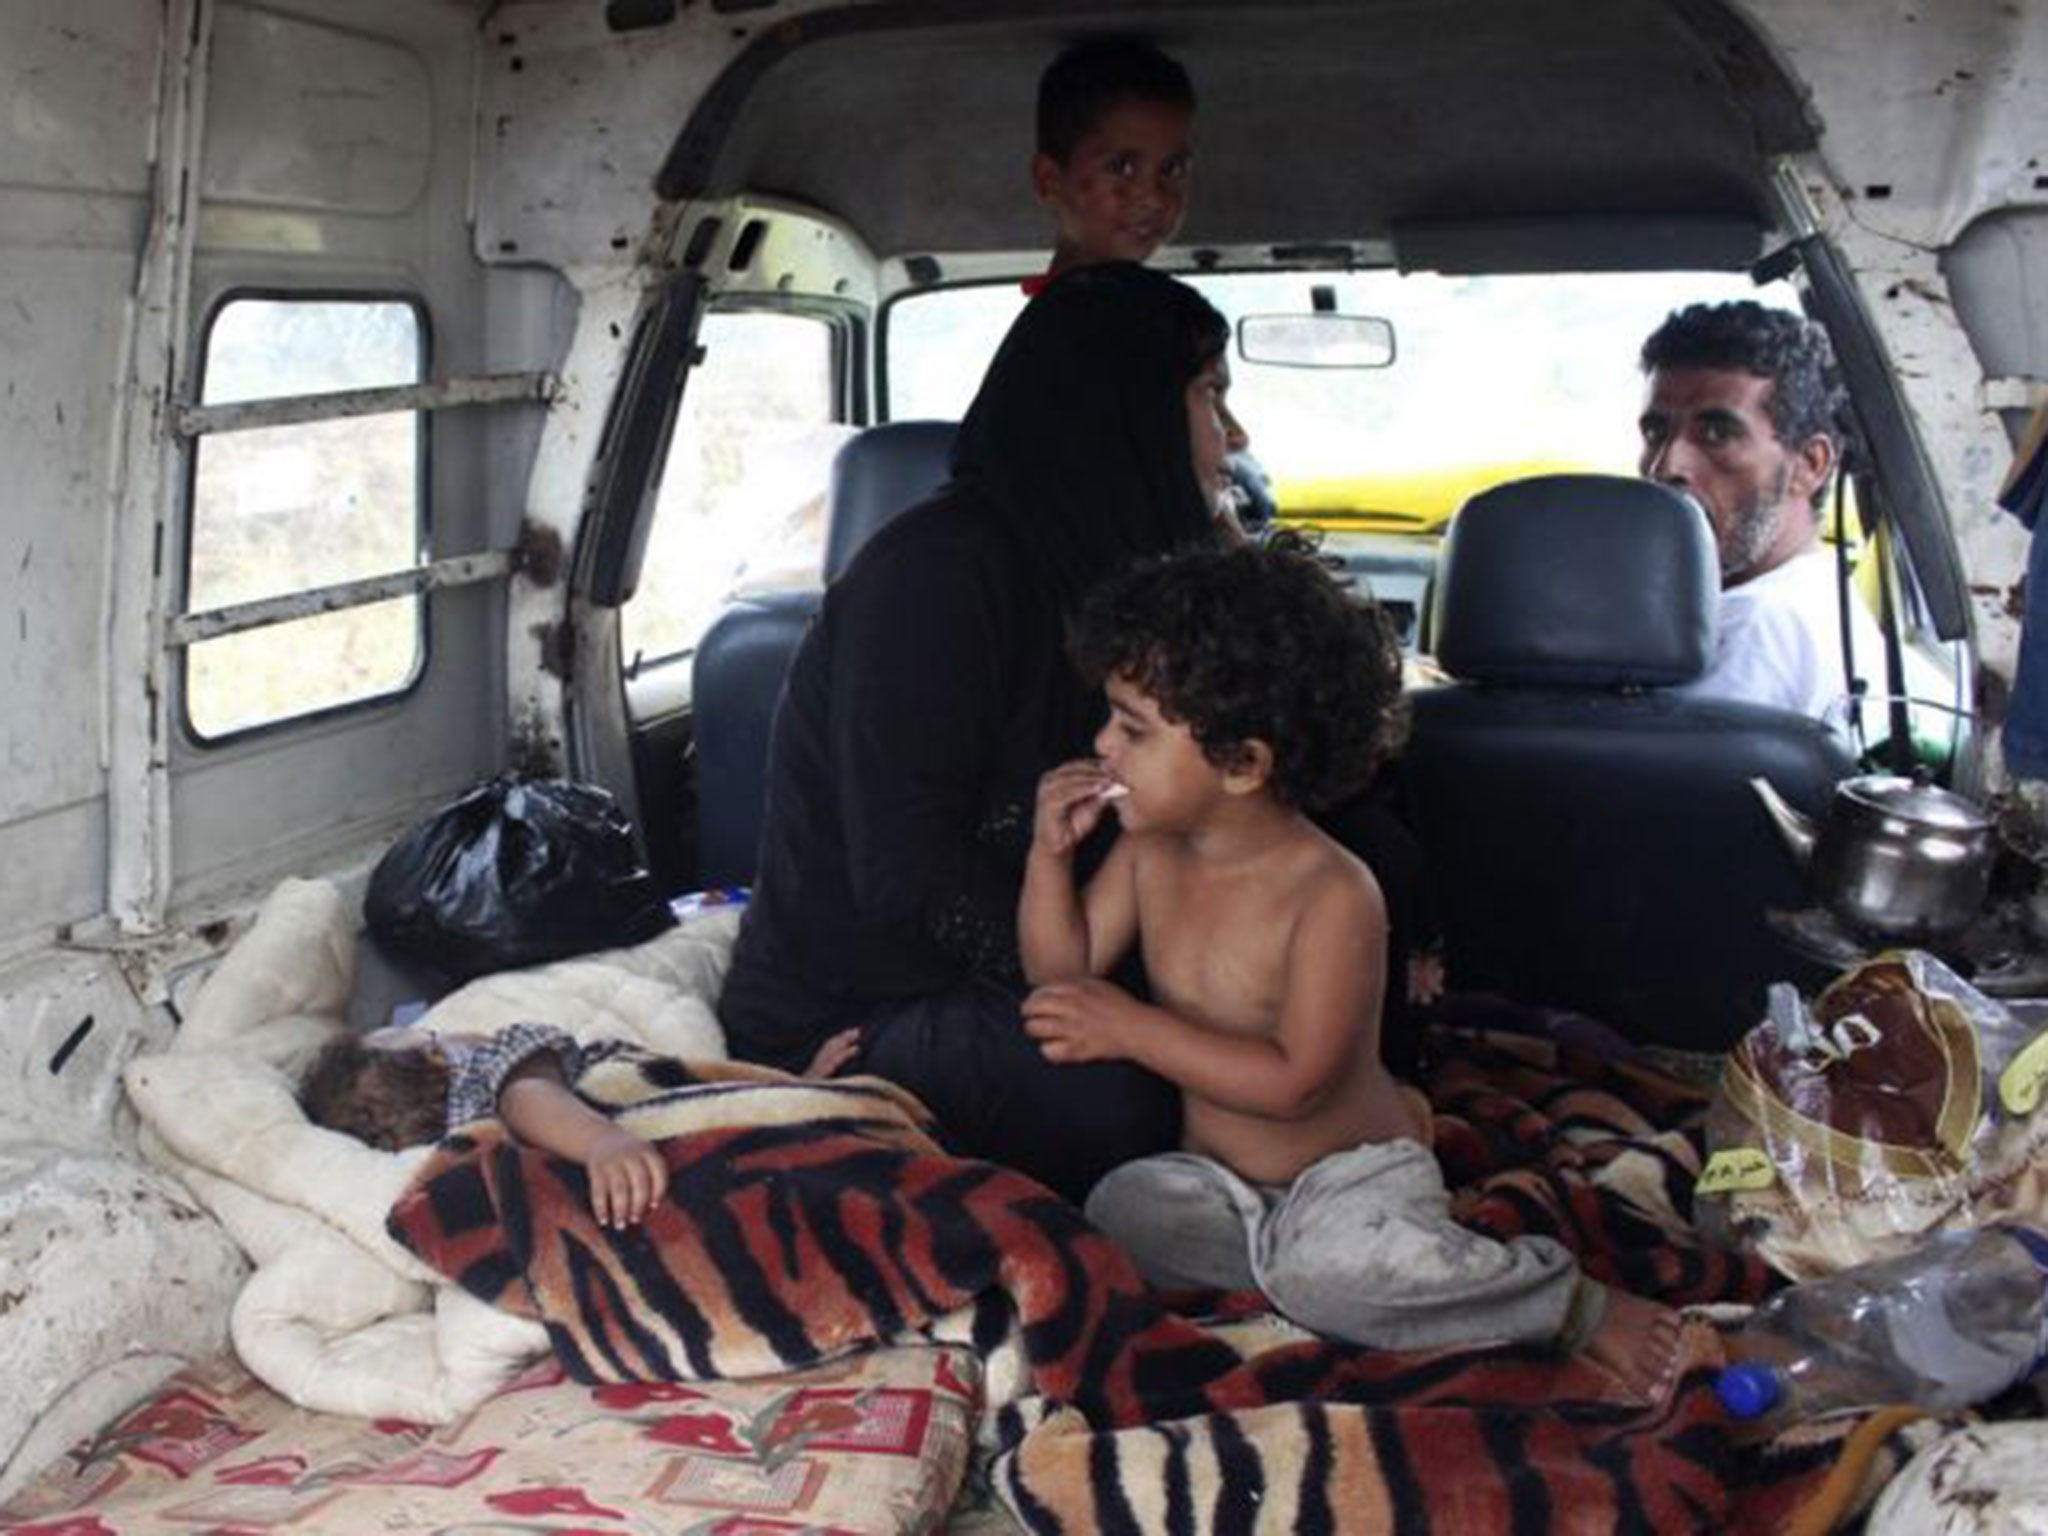 Syrian refugees take shelter inside a van after their makeshift tent was damaged by heavy rain in Halba, northern Lebanon